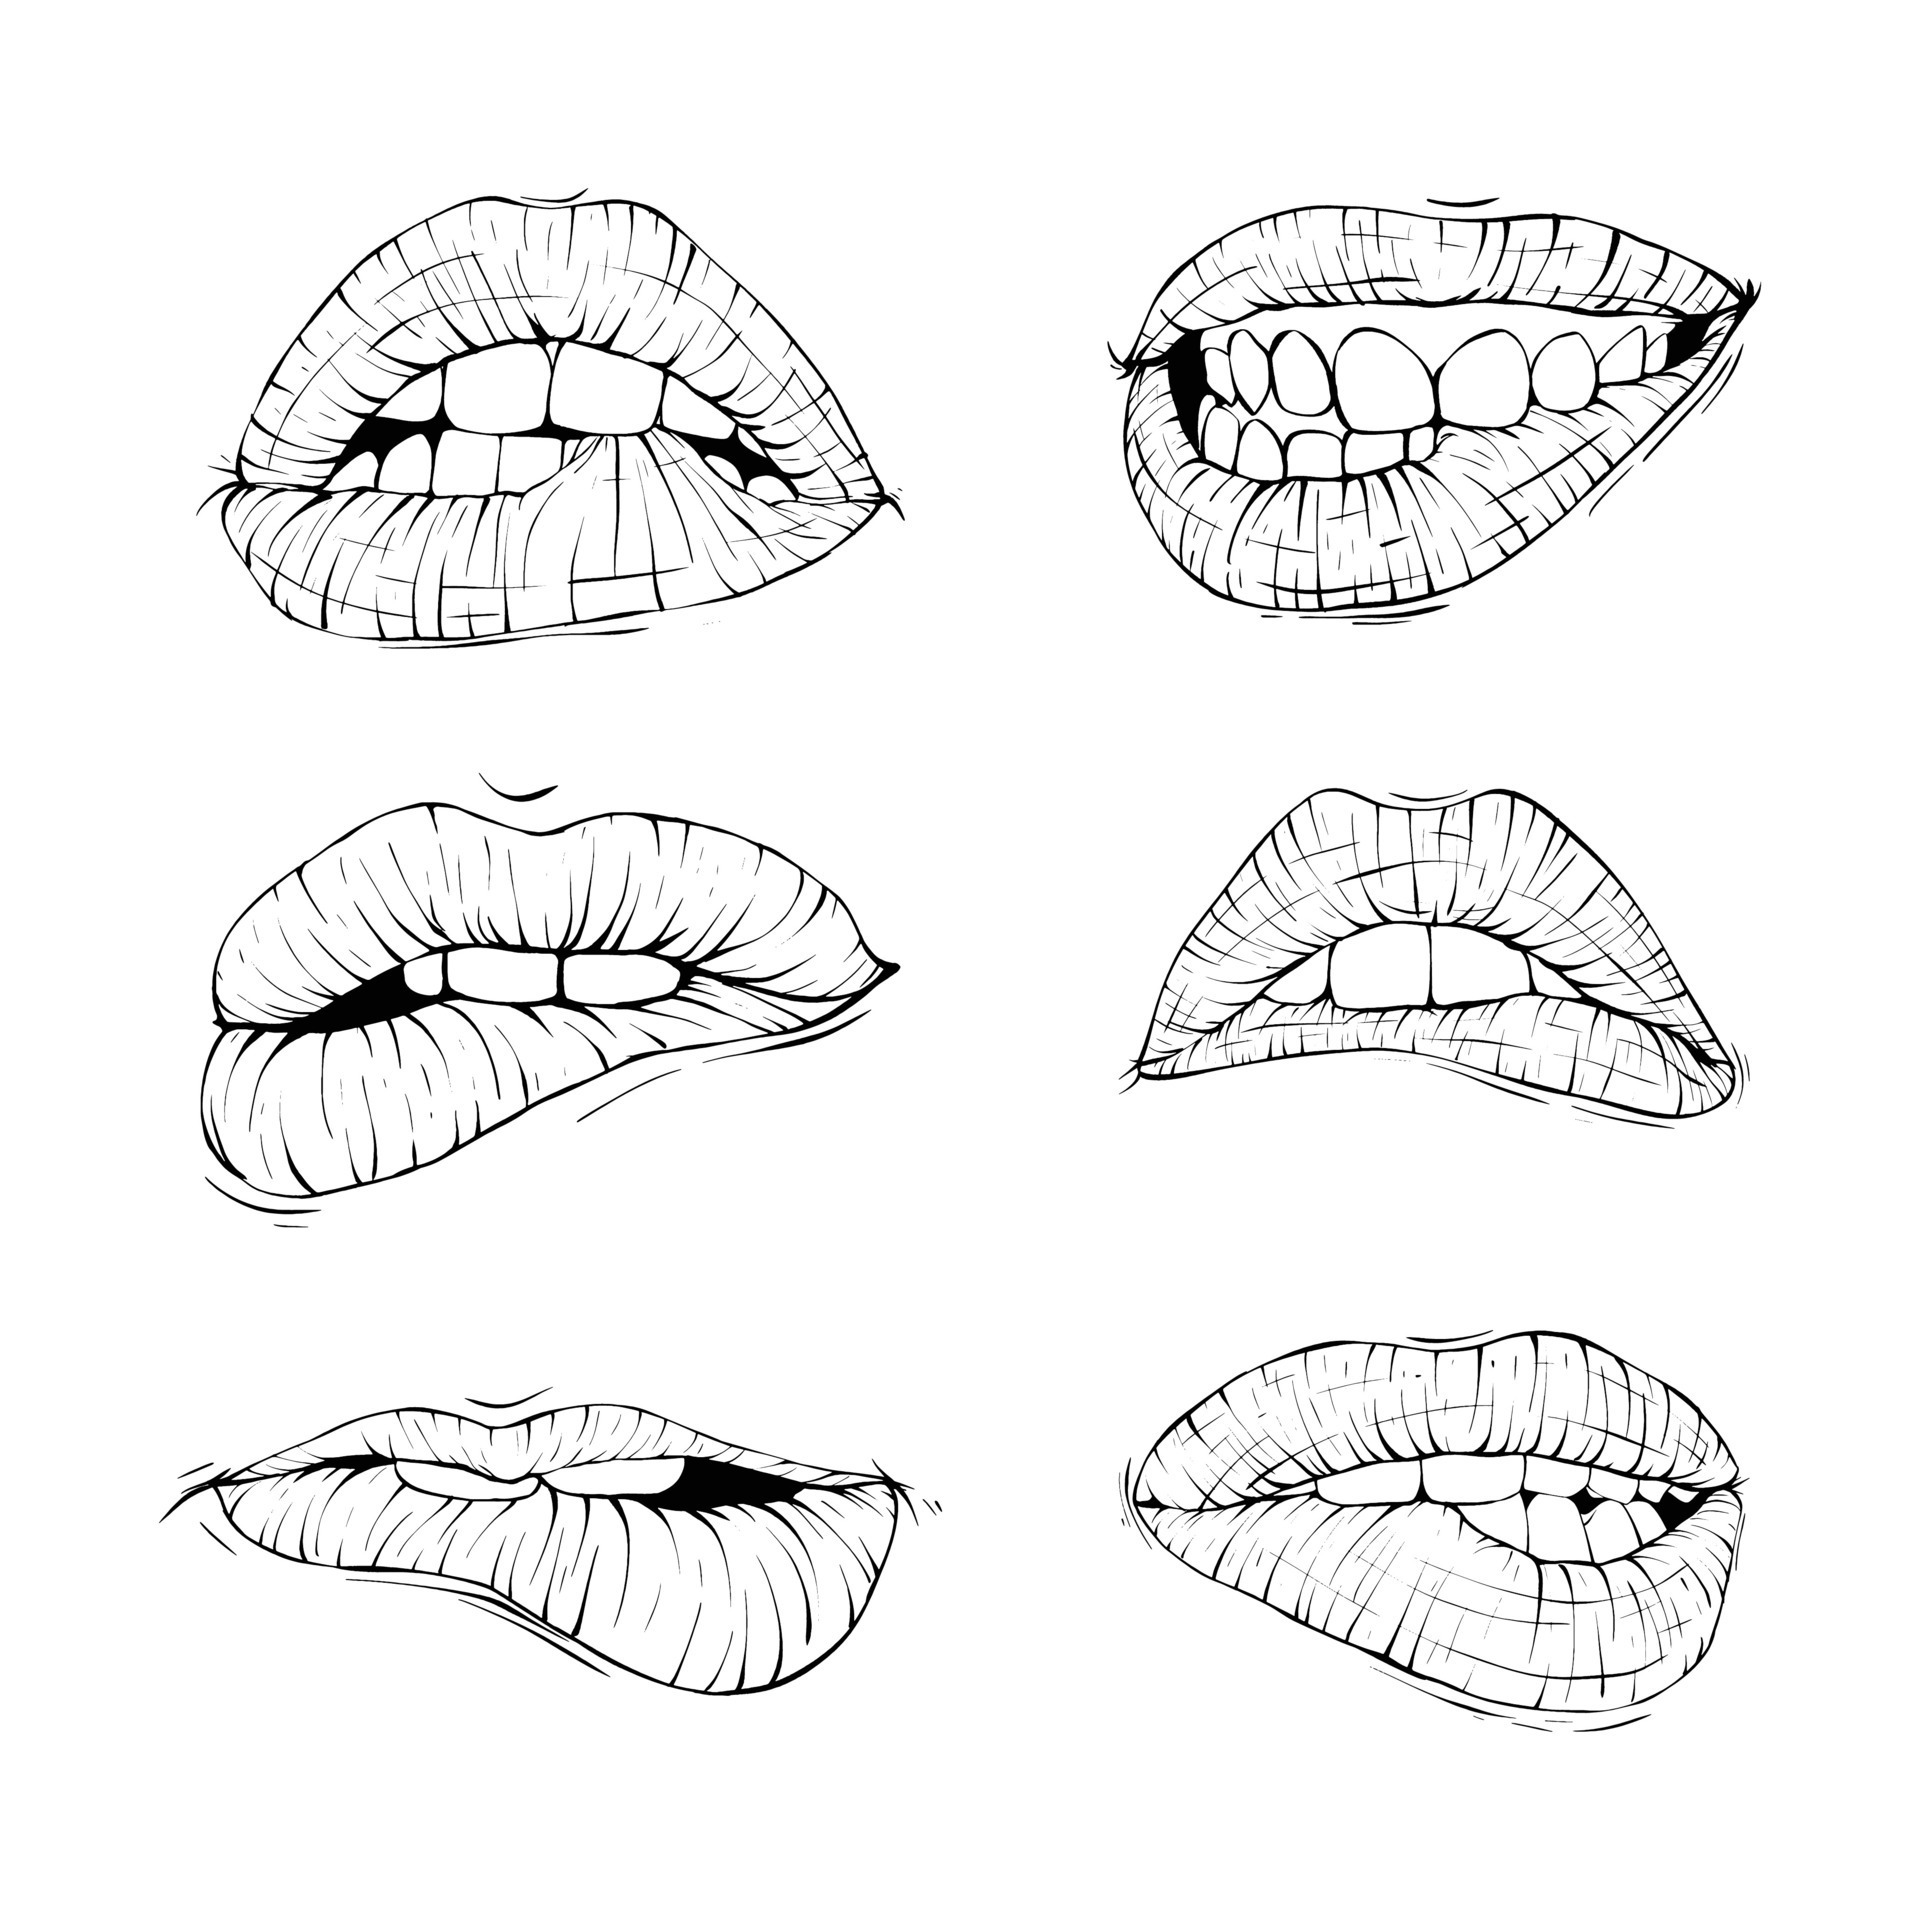 Bite Your Lip Sketch Seductive Mouth Vector Illustration Coloring Book  For Children Valentines Day Doodle Style My Teeth Bit Into My Lower Lip  Sensual Bite Outline On An Isolated Background Royalty Free